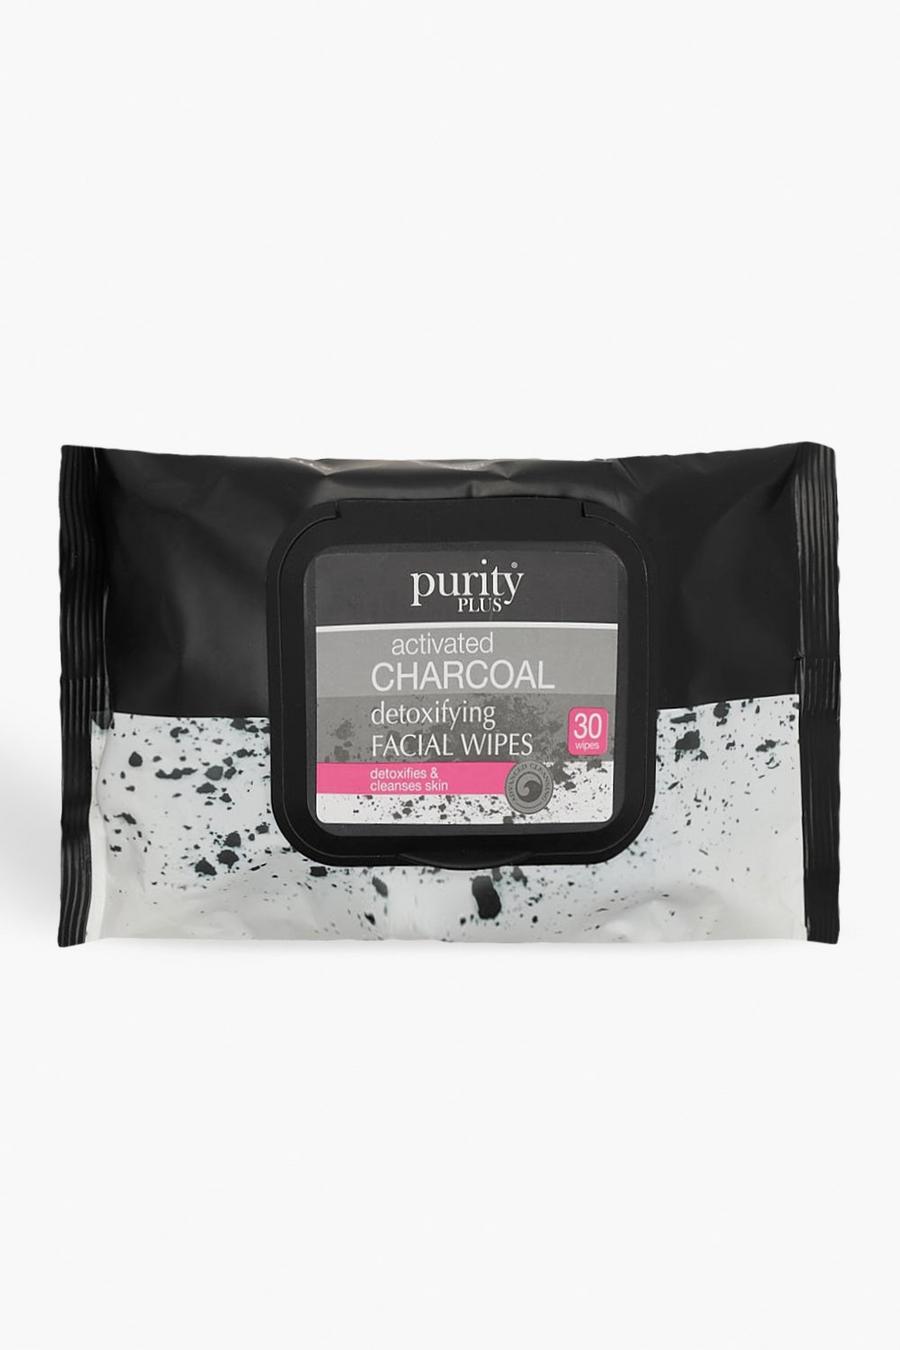 Purity Plus Charcoal Face Wipes image number 1